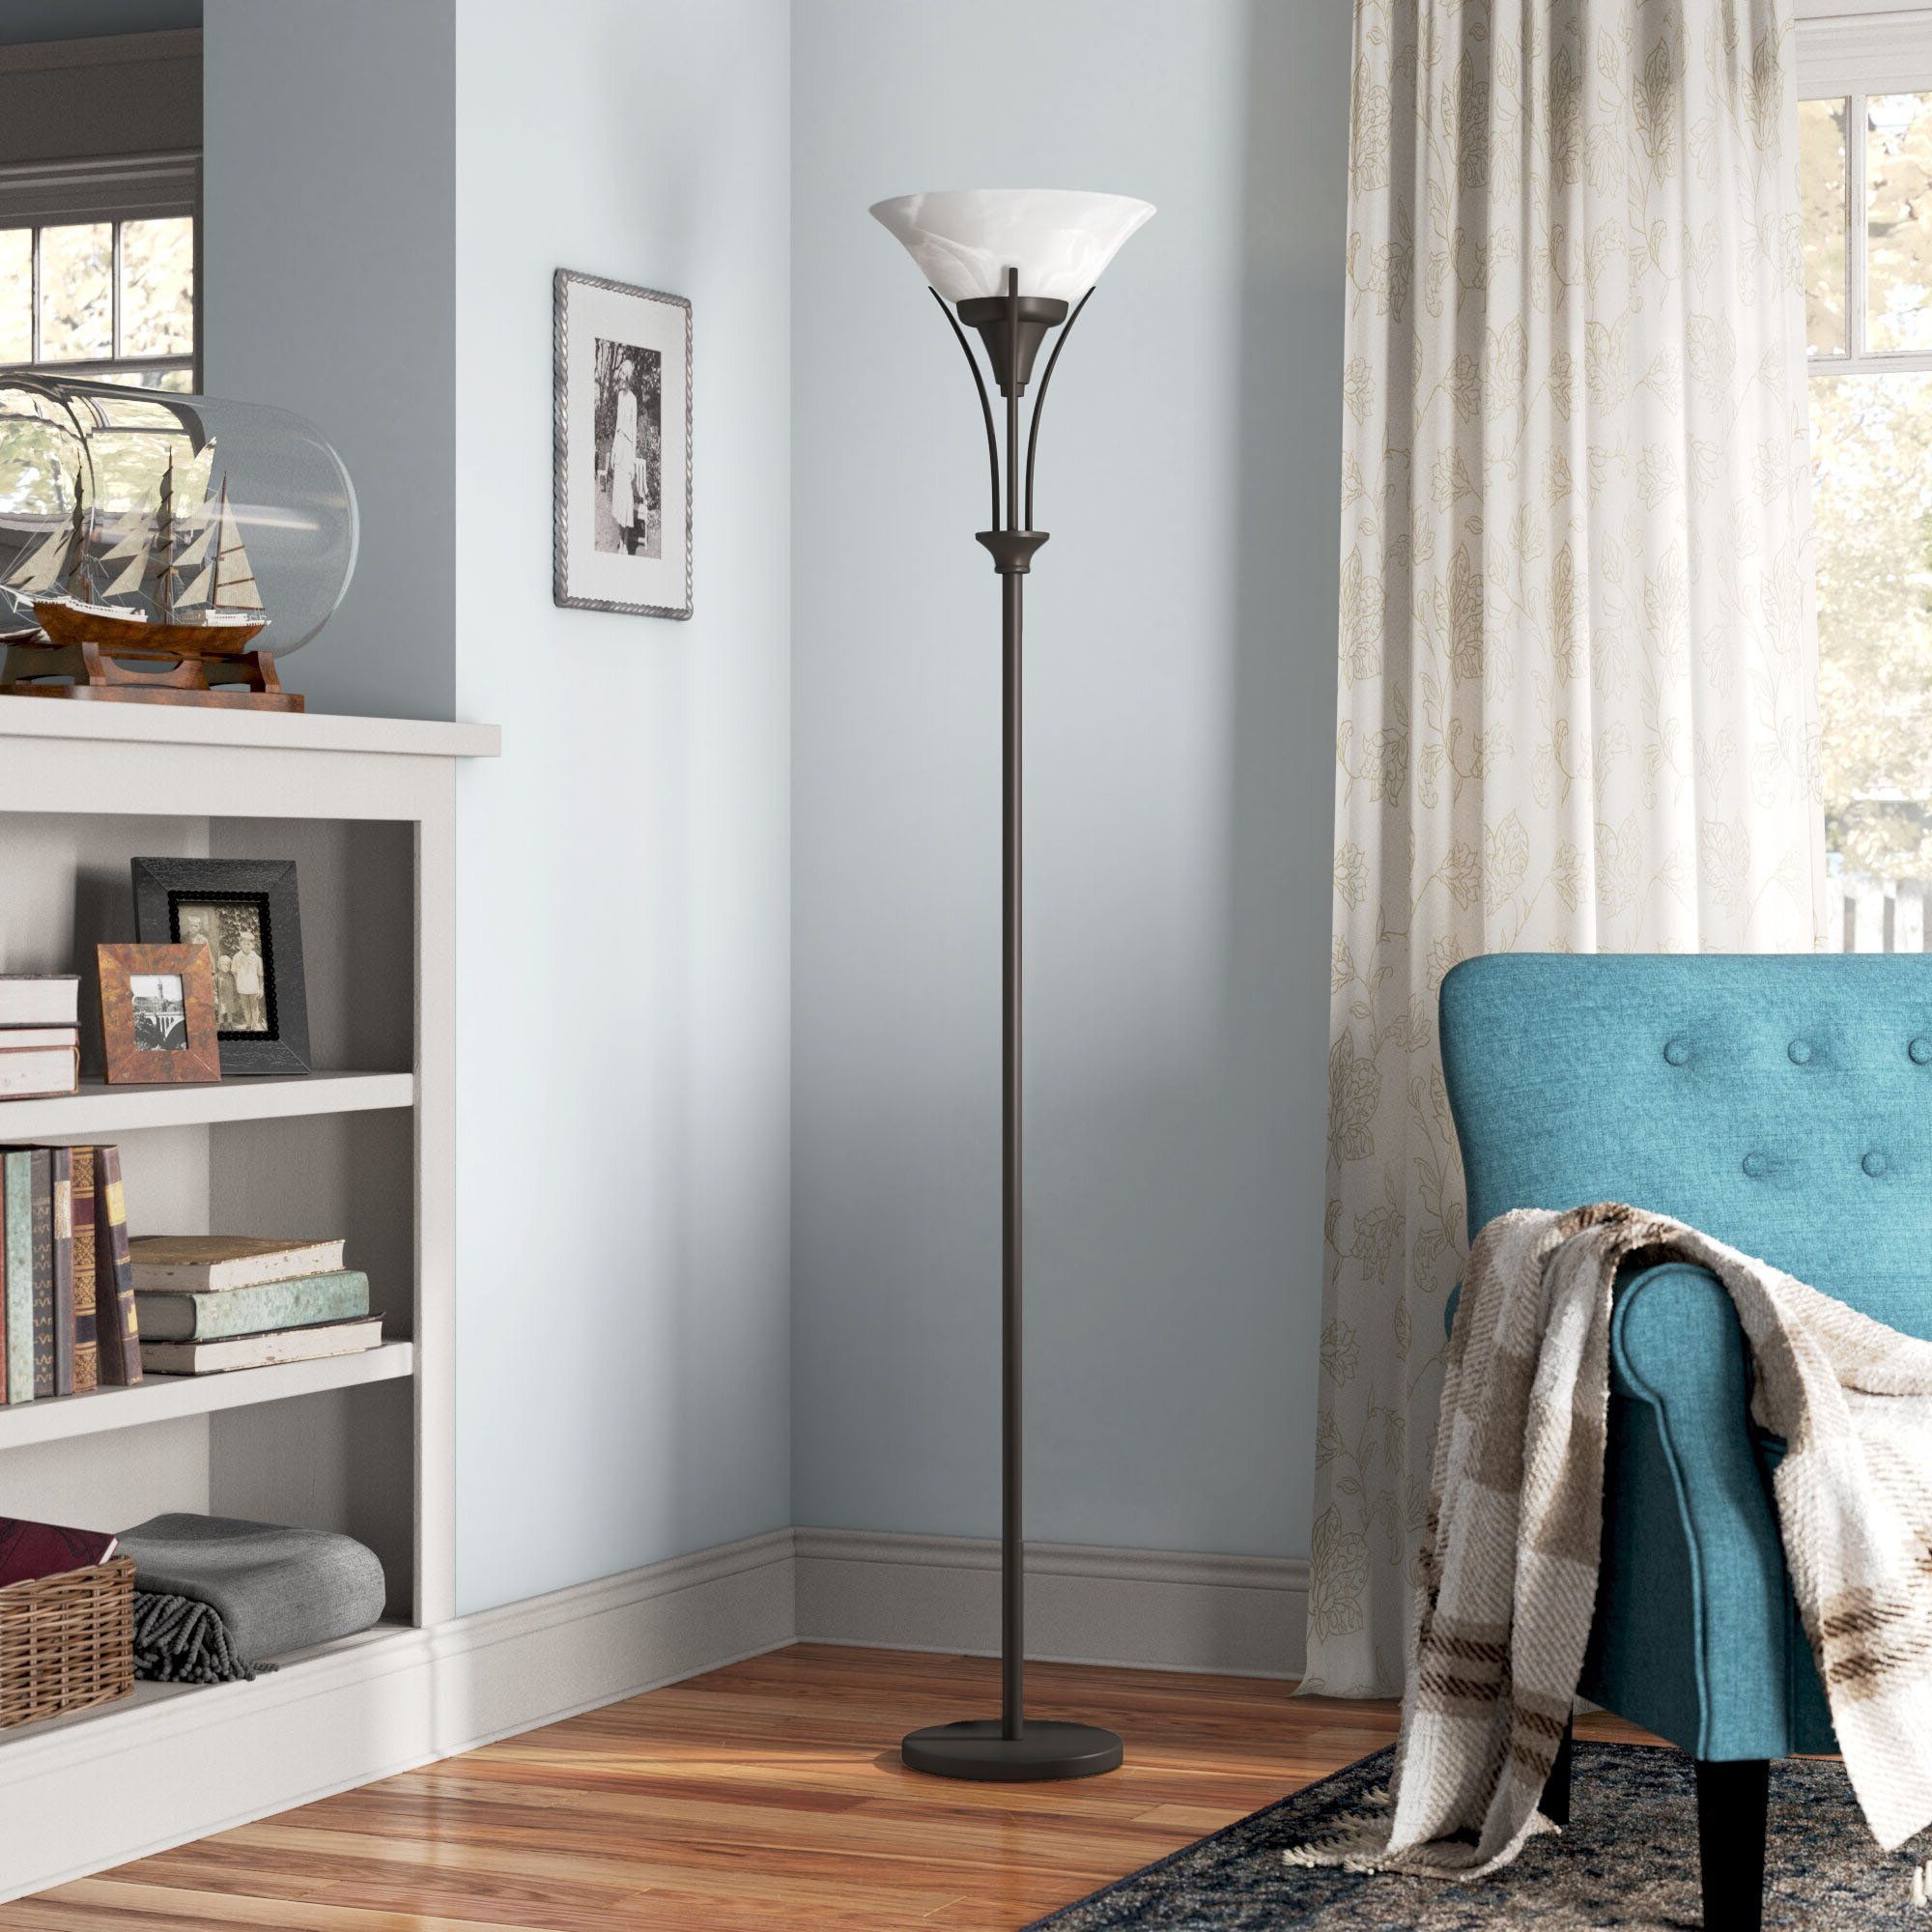 Extra Tall (70+ Inches) Floor Lamps In Current 75 Inch Floor Lamps (View 2 of 15)